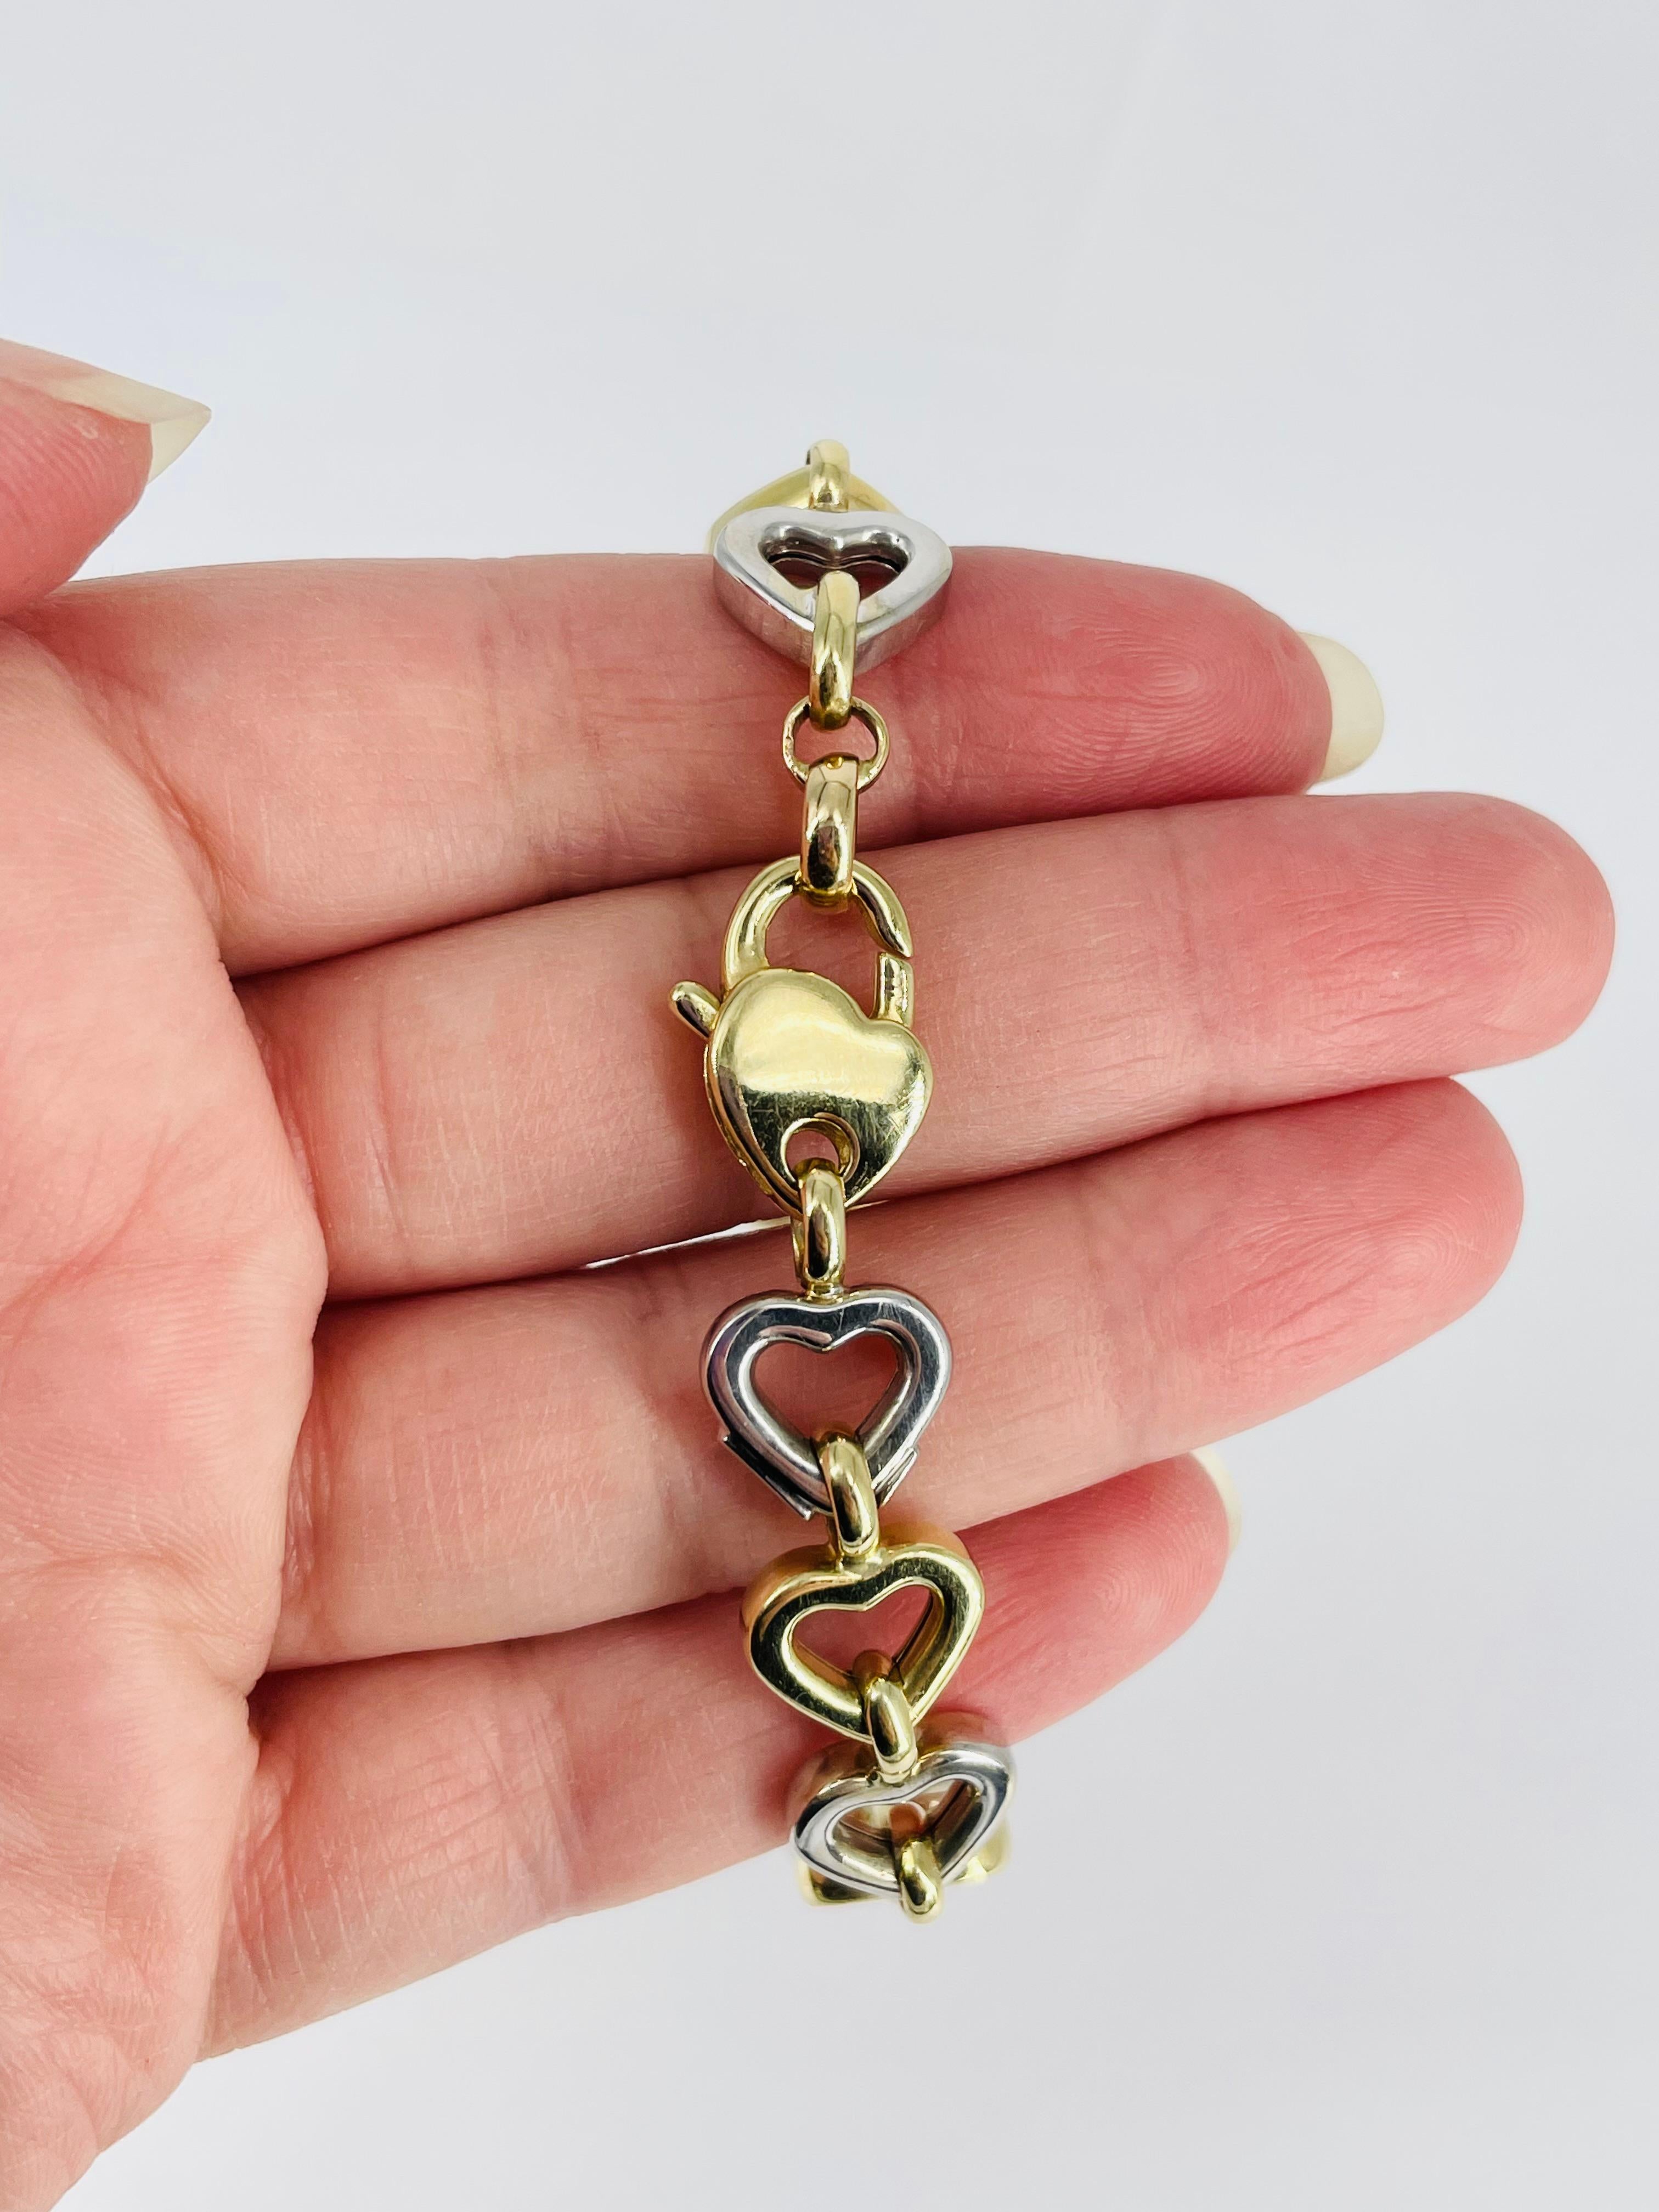 This sweet bracelet is perfect with every outfit! Crafted in 14K white and yellow gold, the alternating open heart and oval links add texture and movement. The heart shaped lobster clasp is a sweet detail that adds to the charm of the piece.